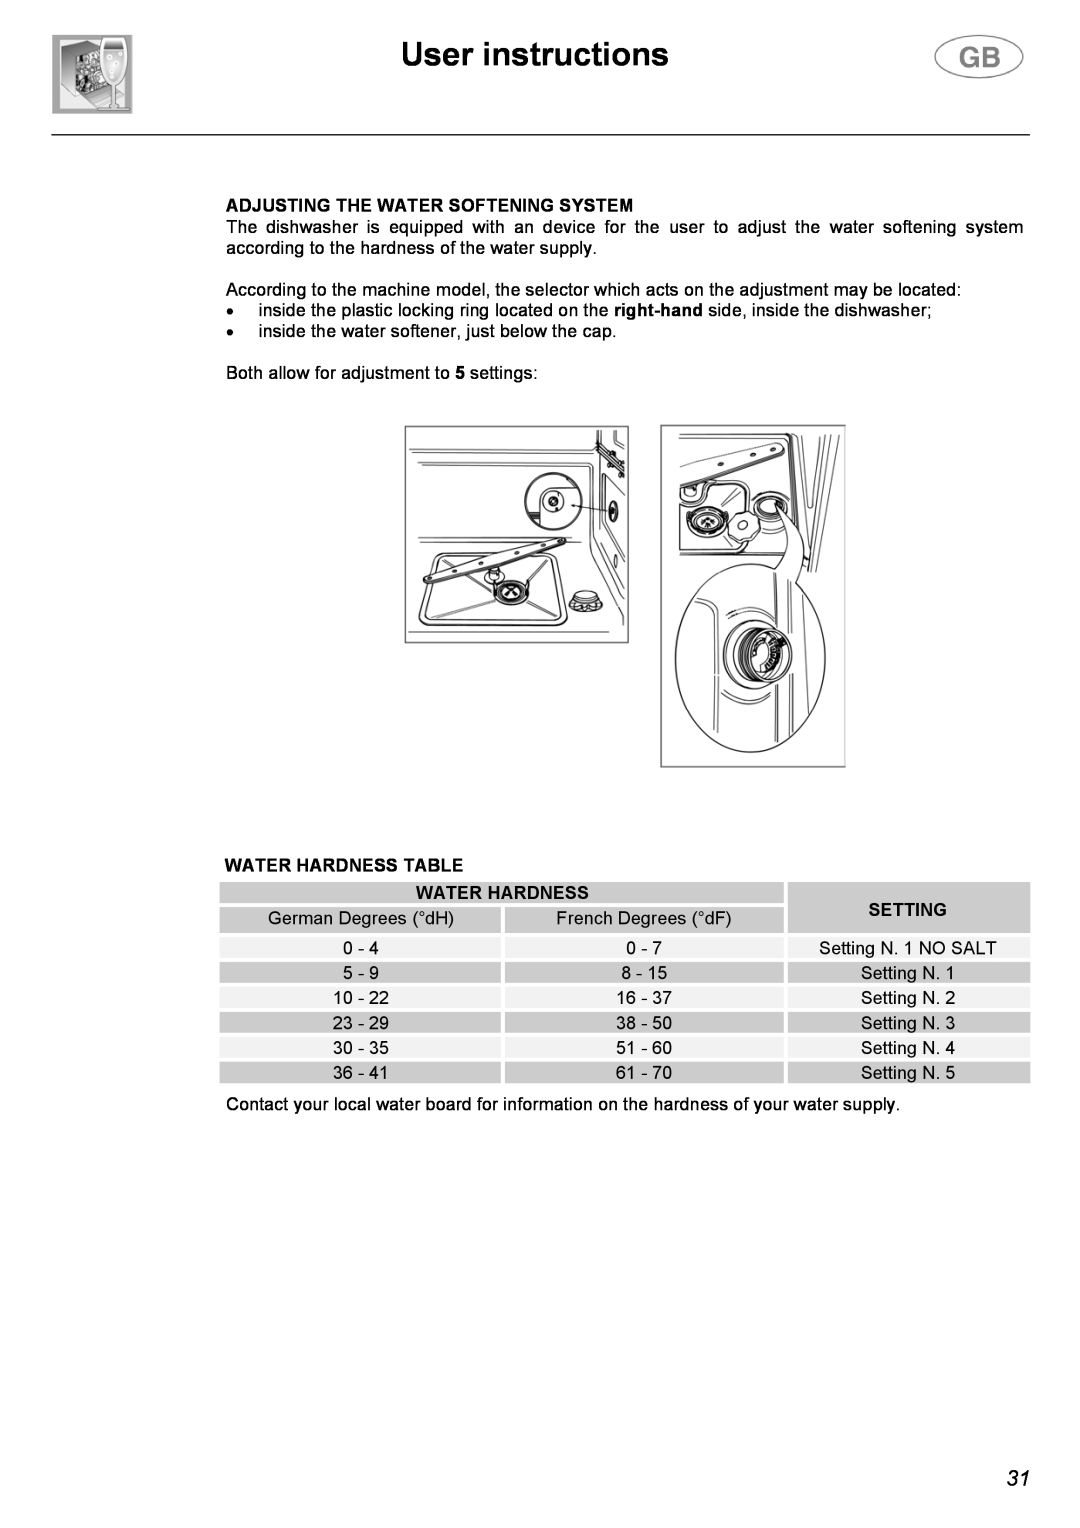 Smeg DWD63BLE, DWD63SSE User instructions, Adjusting The Water Softening System, Water Hardness Table, Setting 